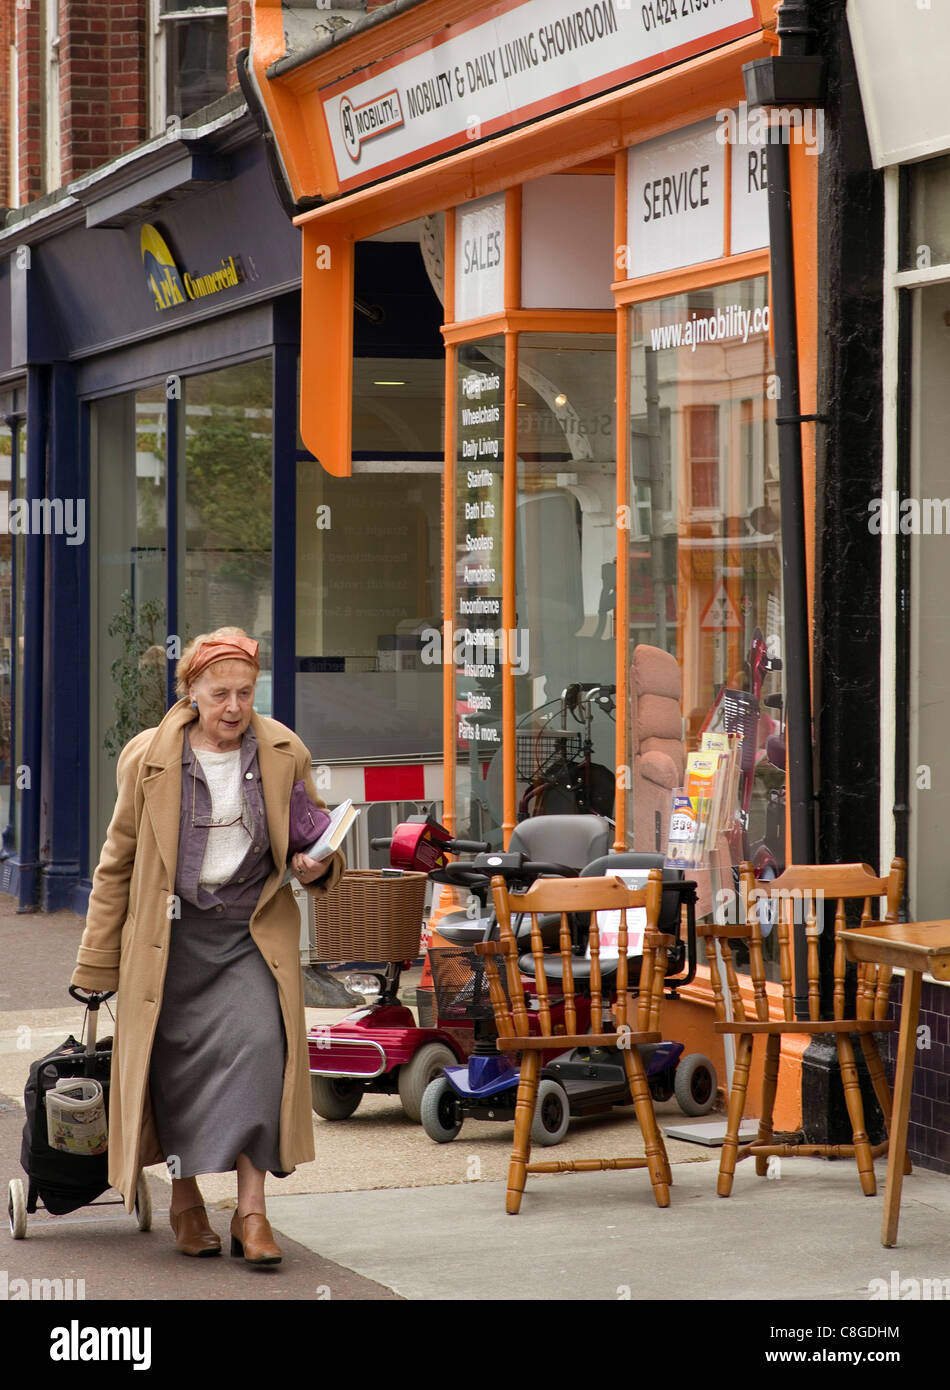 older woman walking past a small shop selling mobility scooters and useful equipment for the elderly Stock Photo